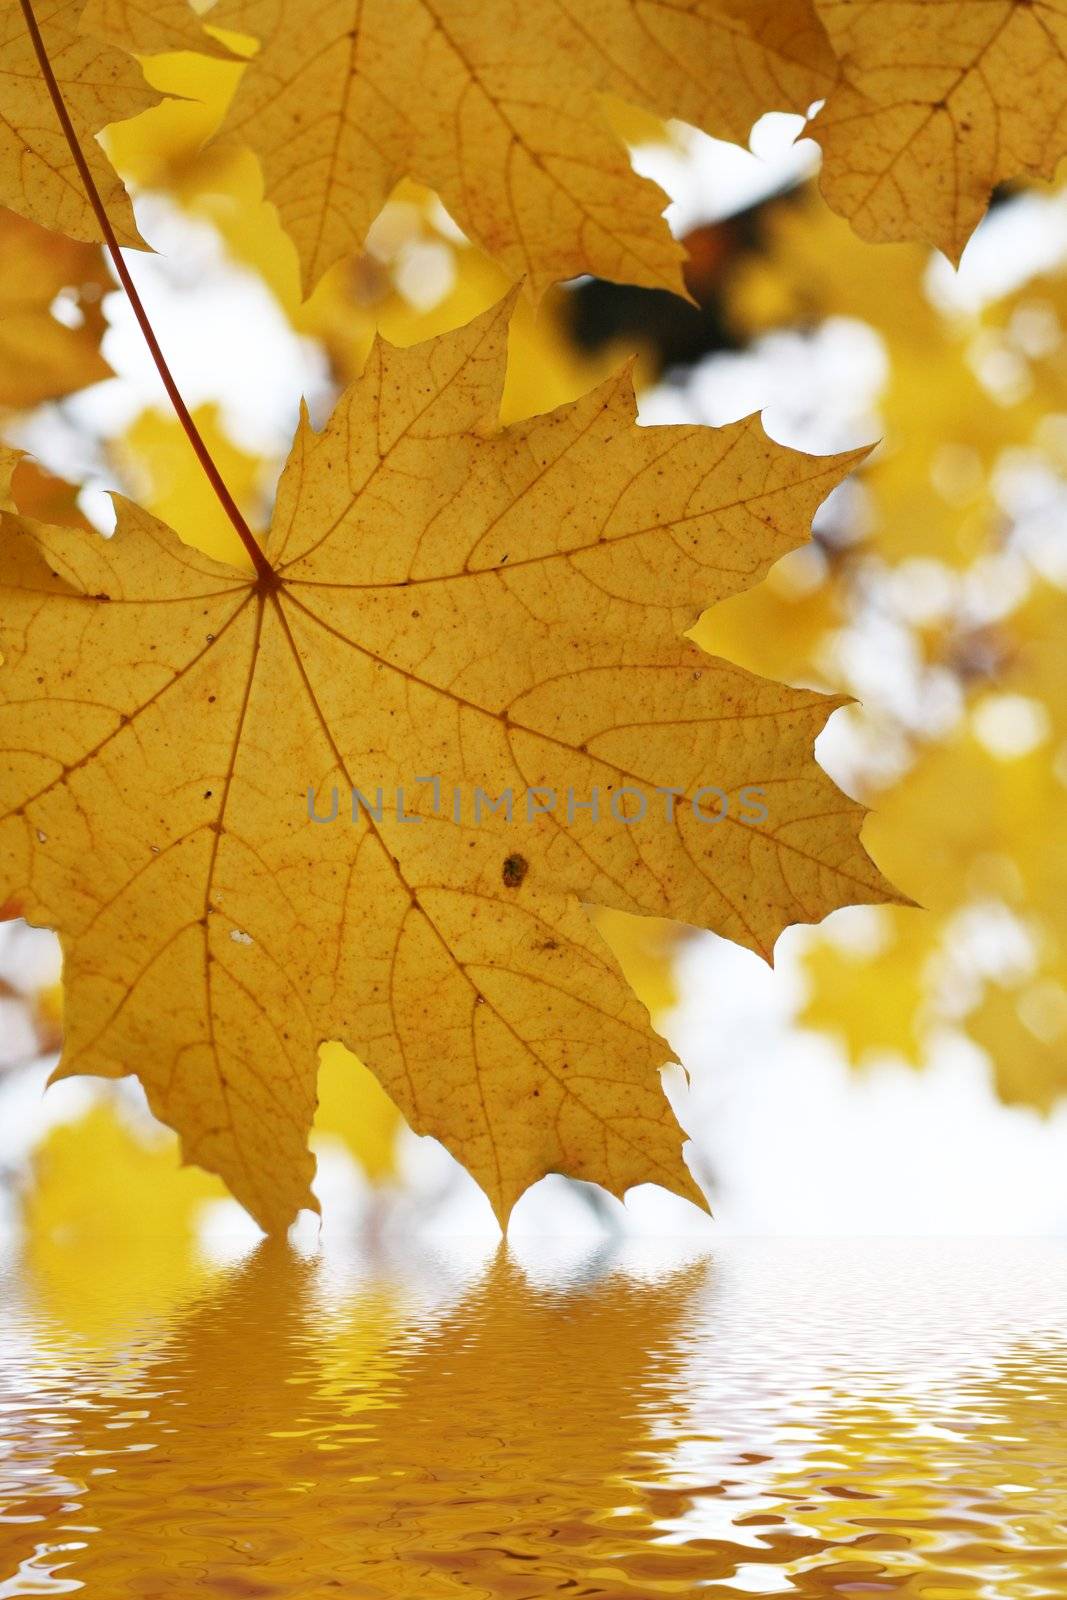 Autumn leafs above the water - fall background